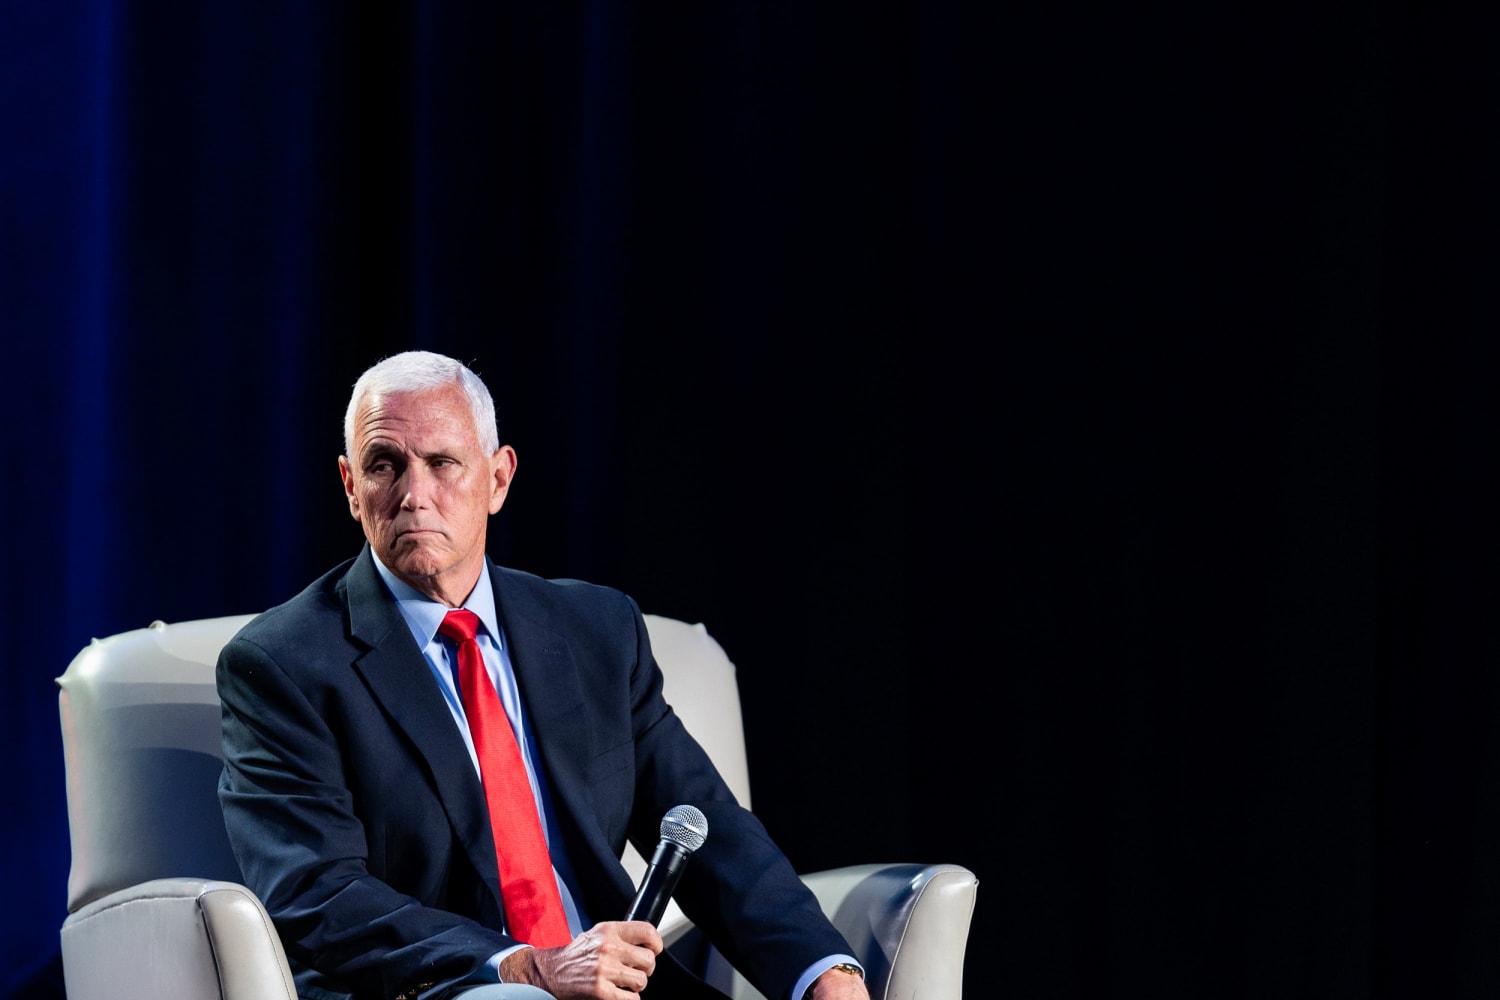 Mike Pence backtracks on impeachment comments after Kevin McCarthy's U-turn on House floor vote